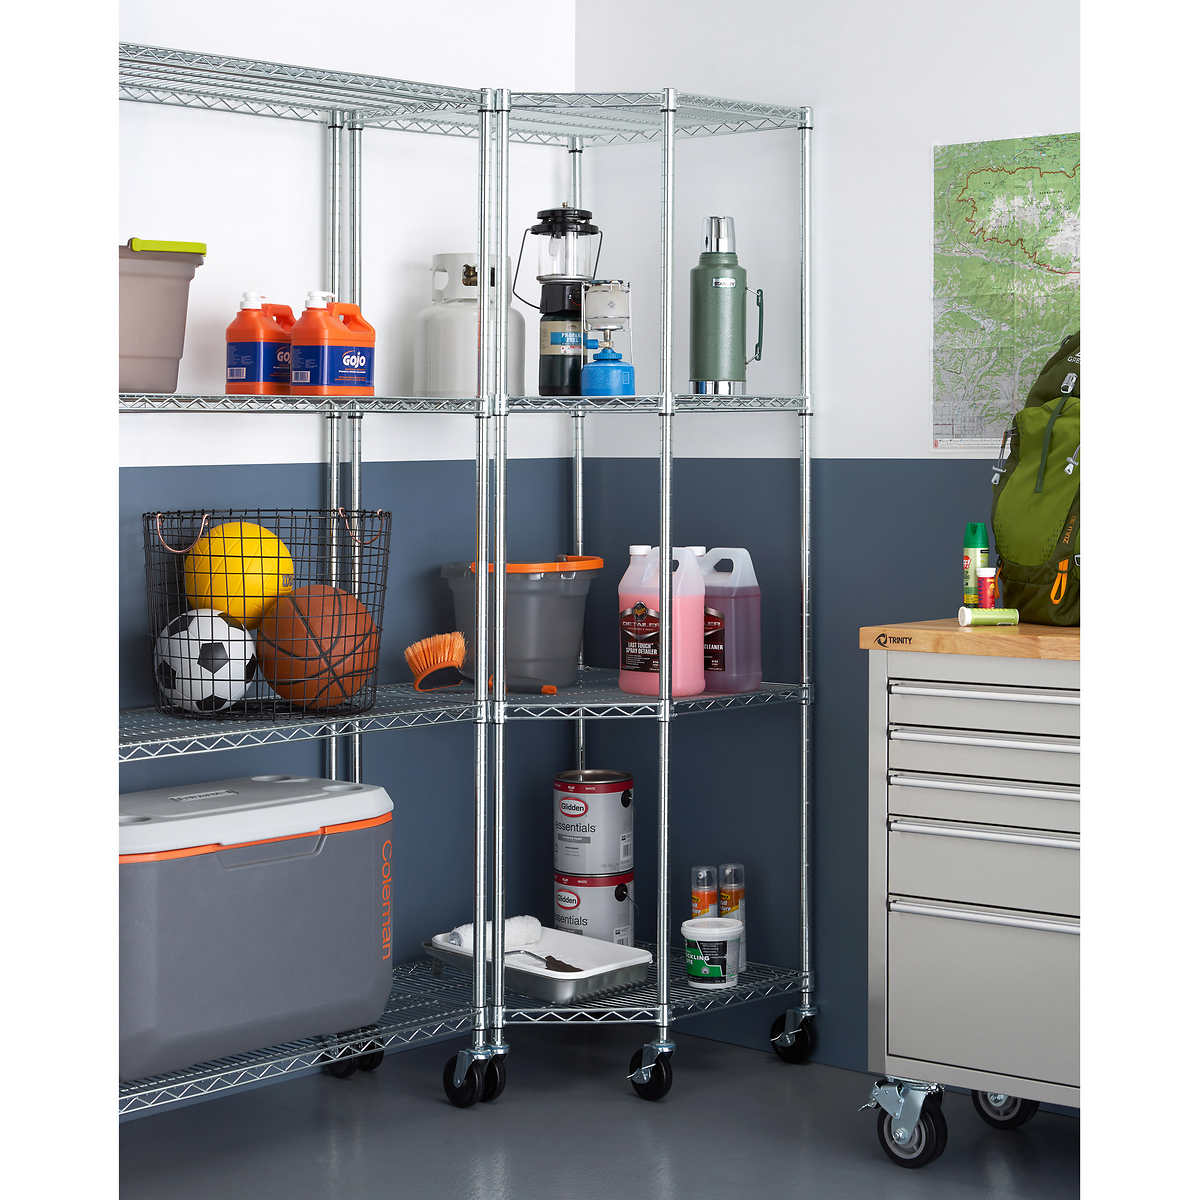 TRINITY EcoStorage 4-Tier Corner Wire Shelving Rack with Wheels, 18" D, NSF, Chrome Color